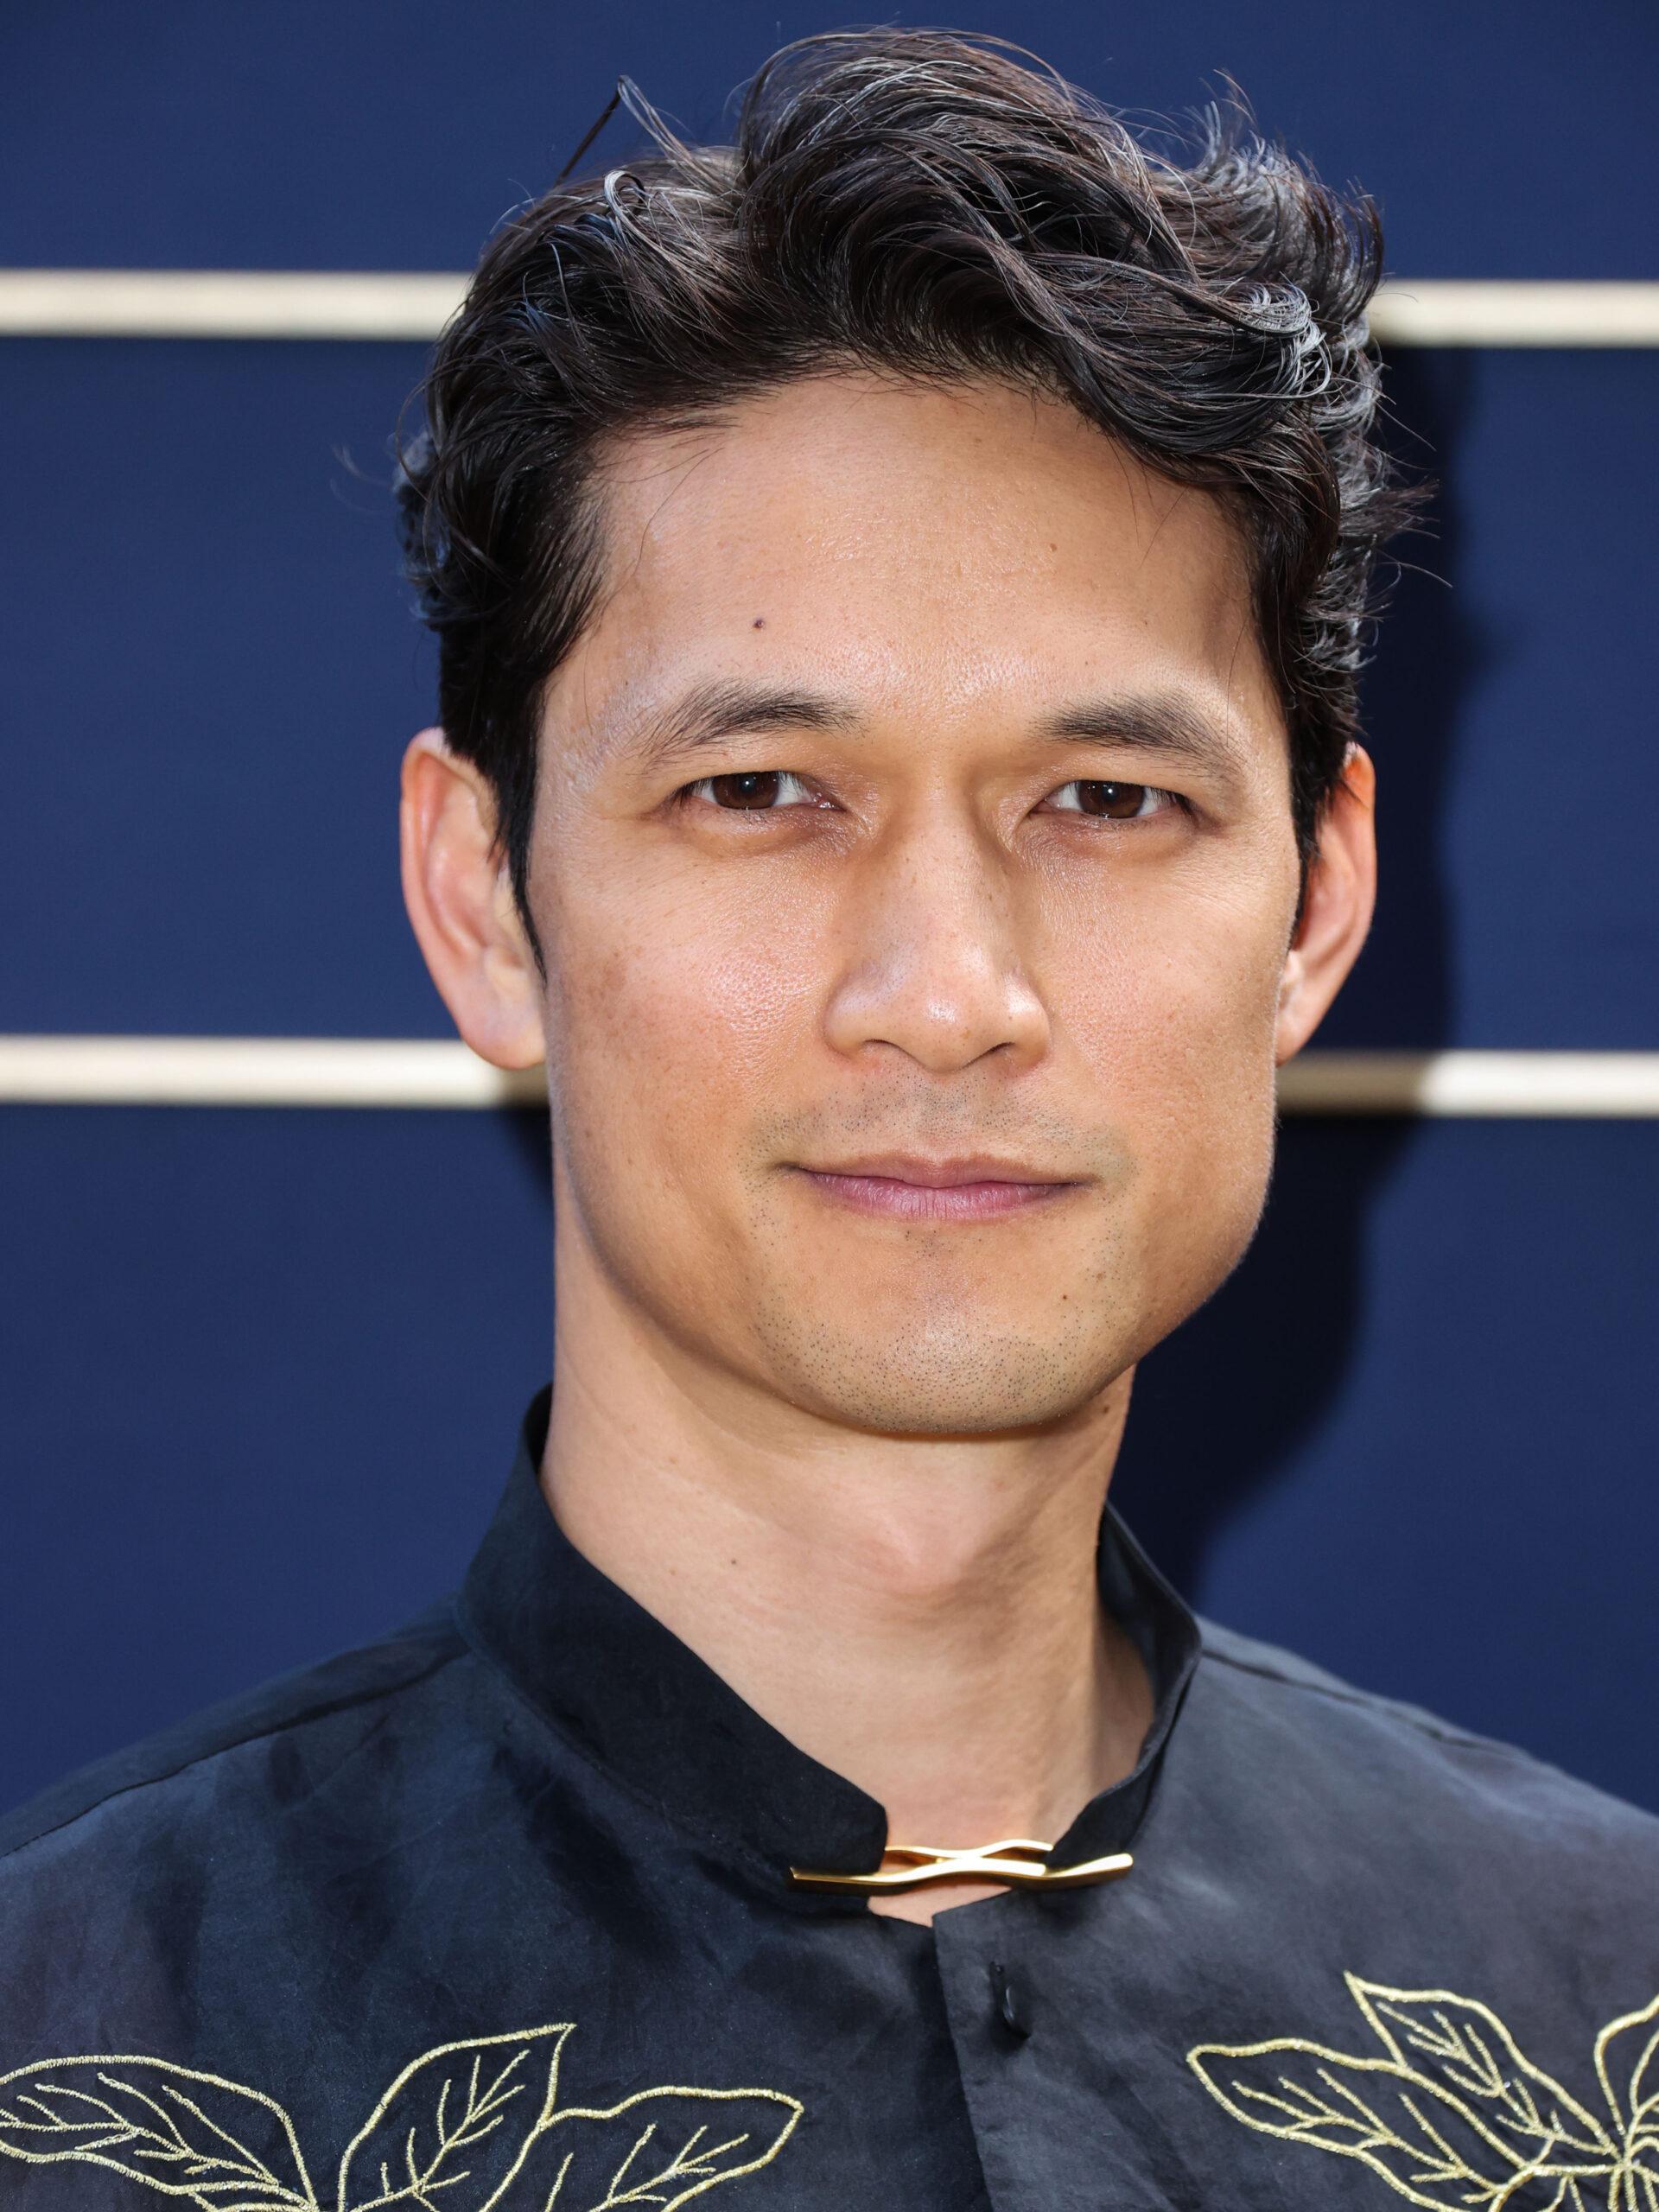 LOS ANGELES, CALIFORNIA, USA - MAY 21: Gold House's Inaugural Gold Gala 2022: The New Gold Age held at Vibiana on May 21, 2022 in Los Angeles, California, United States. 21 May 2022 Pictured: Harry Shum Jr. 